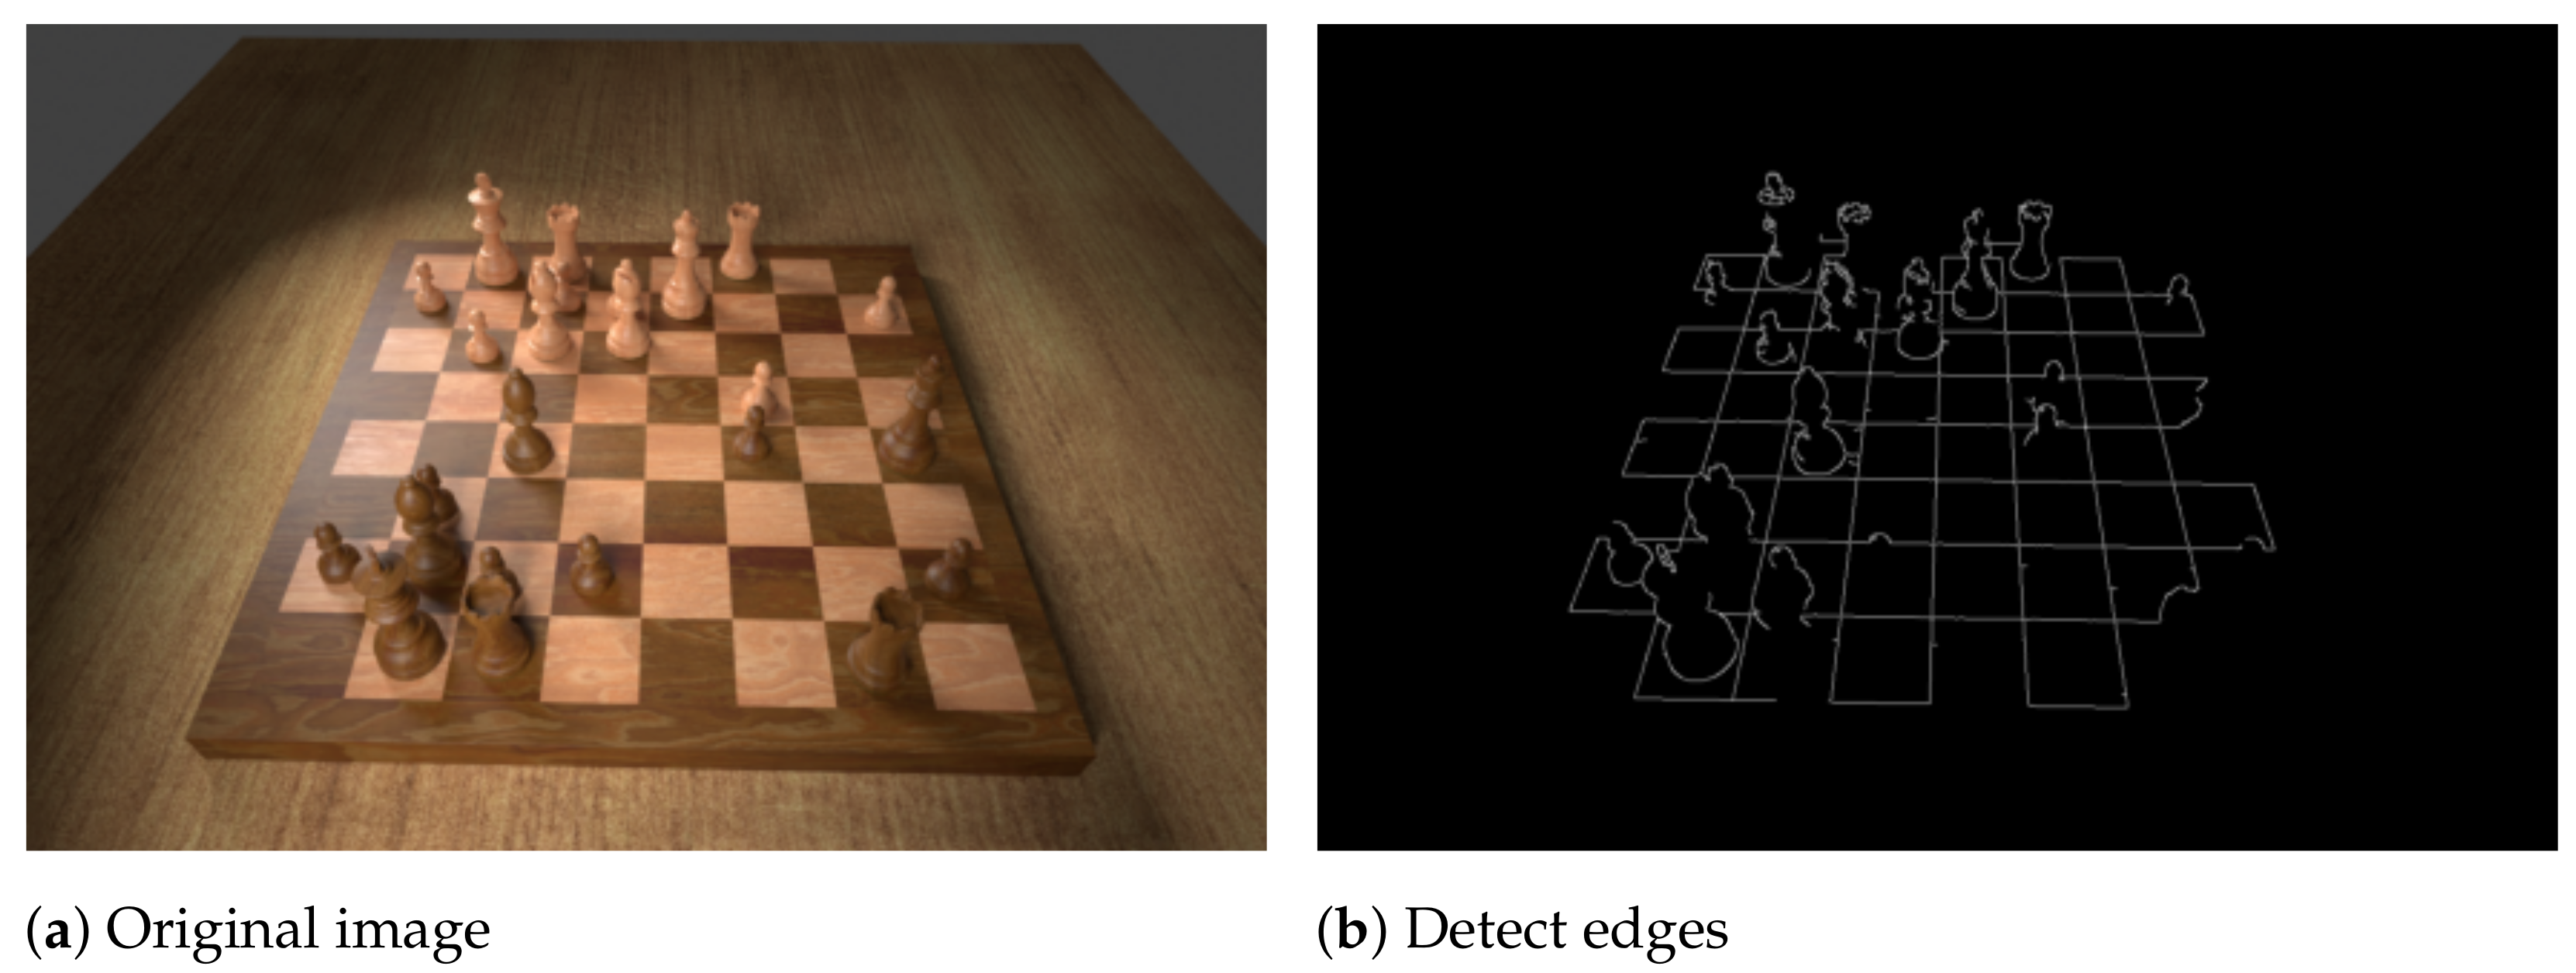 Standard chess board layout in the developed software.